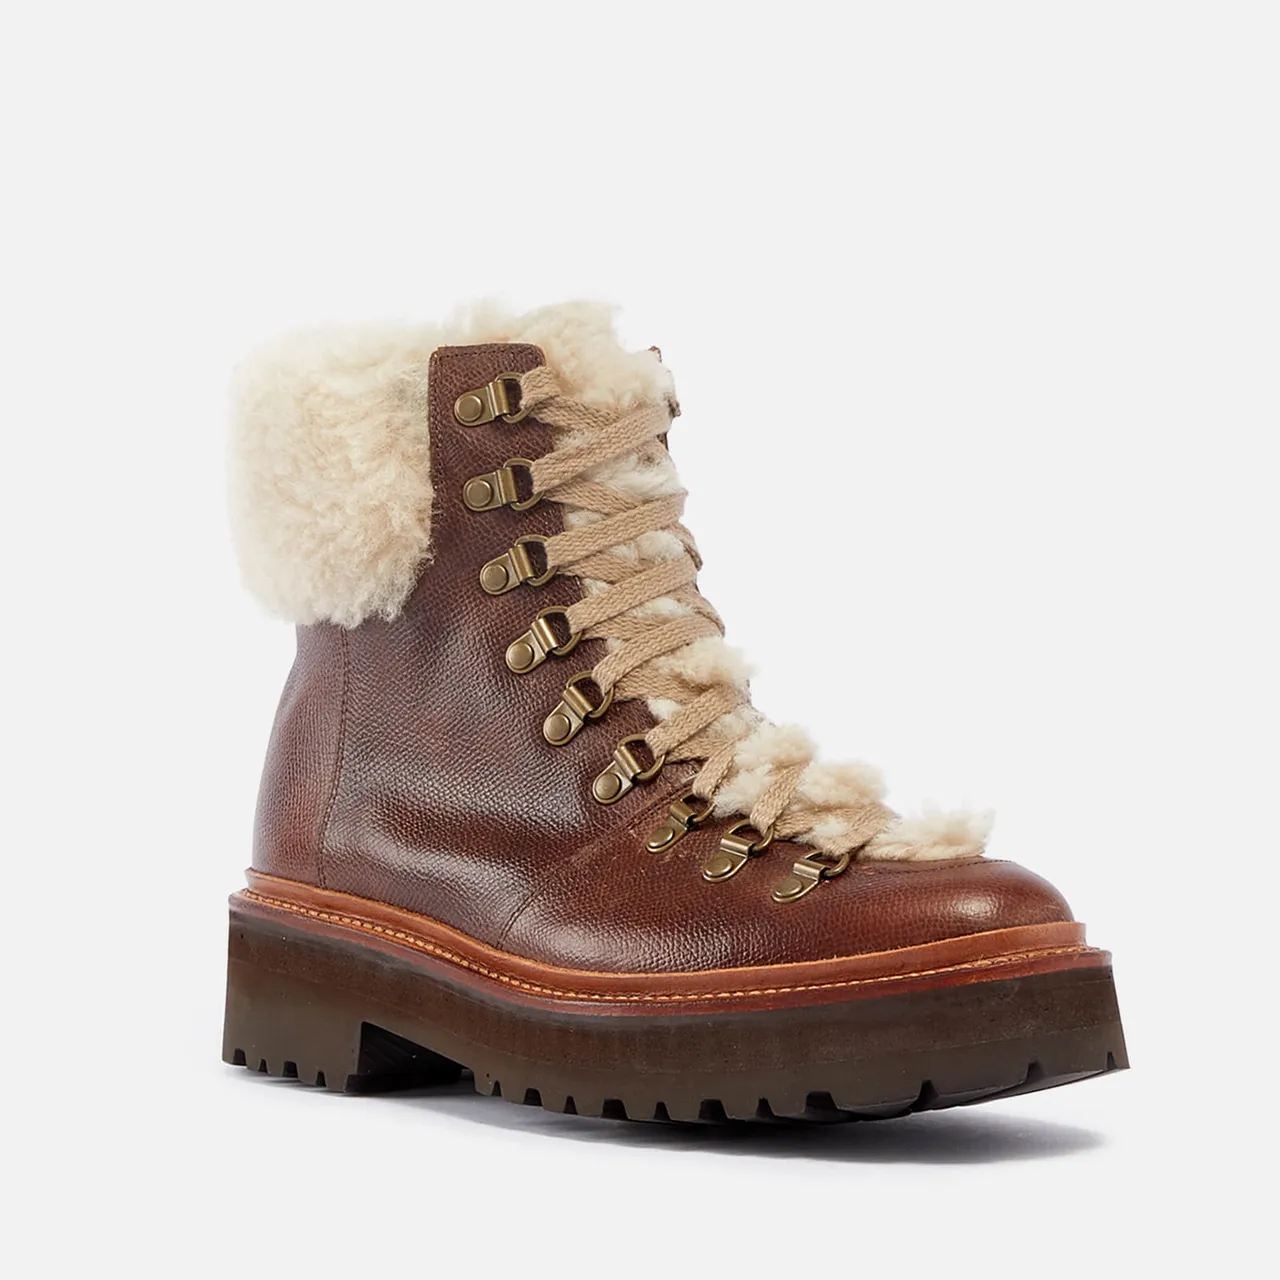 Grenson Nettie Leather and Shearling Hiking-Style Boots - UK